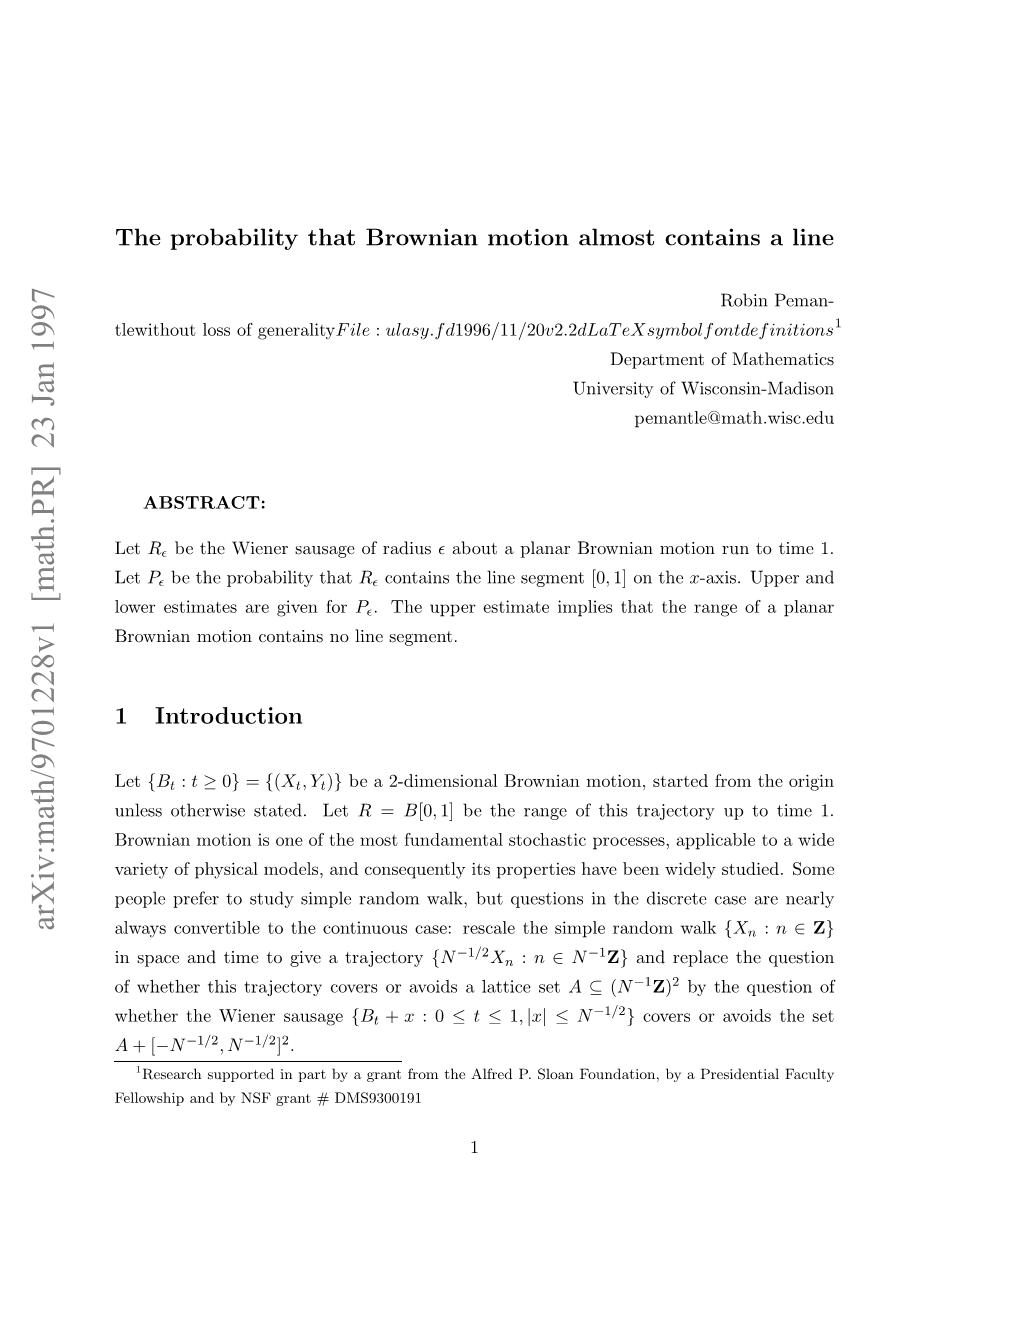 Arxiv:Math/9701228V1 [Math.PR] 23 Jan 1997 Oe Siae R Ie for Given Are Estimates Lower Nesohriesae.Let Stated